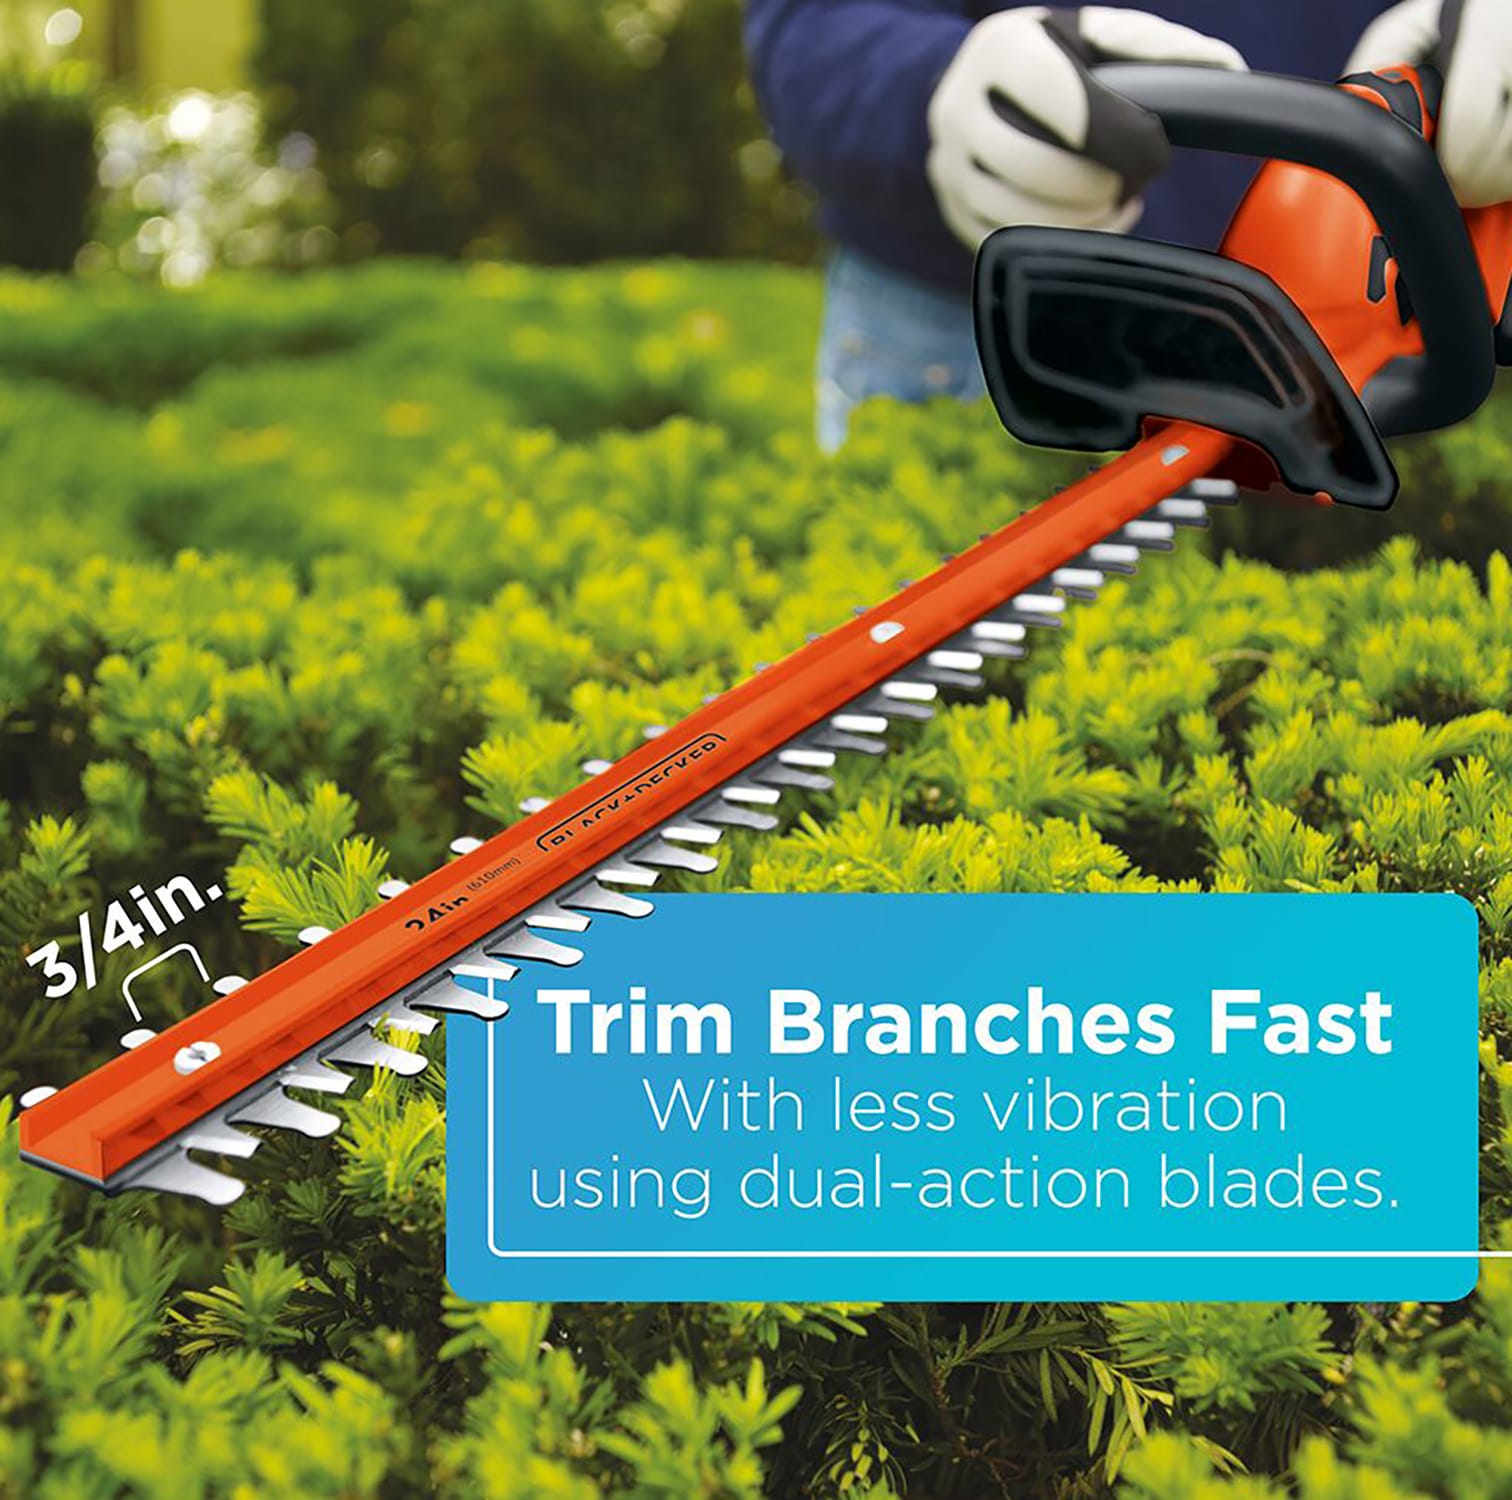 Black + Decker 40v Max Lithium 24 In. Hedge Trimmer - Bare Tool Only, Trimmers, Edgers & Blowers, Patio, Garden & Garage